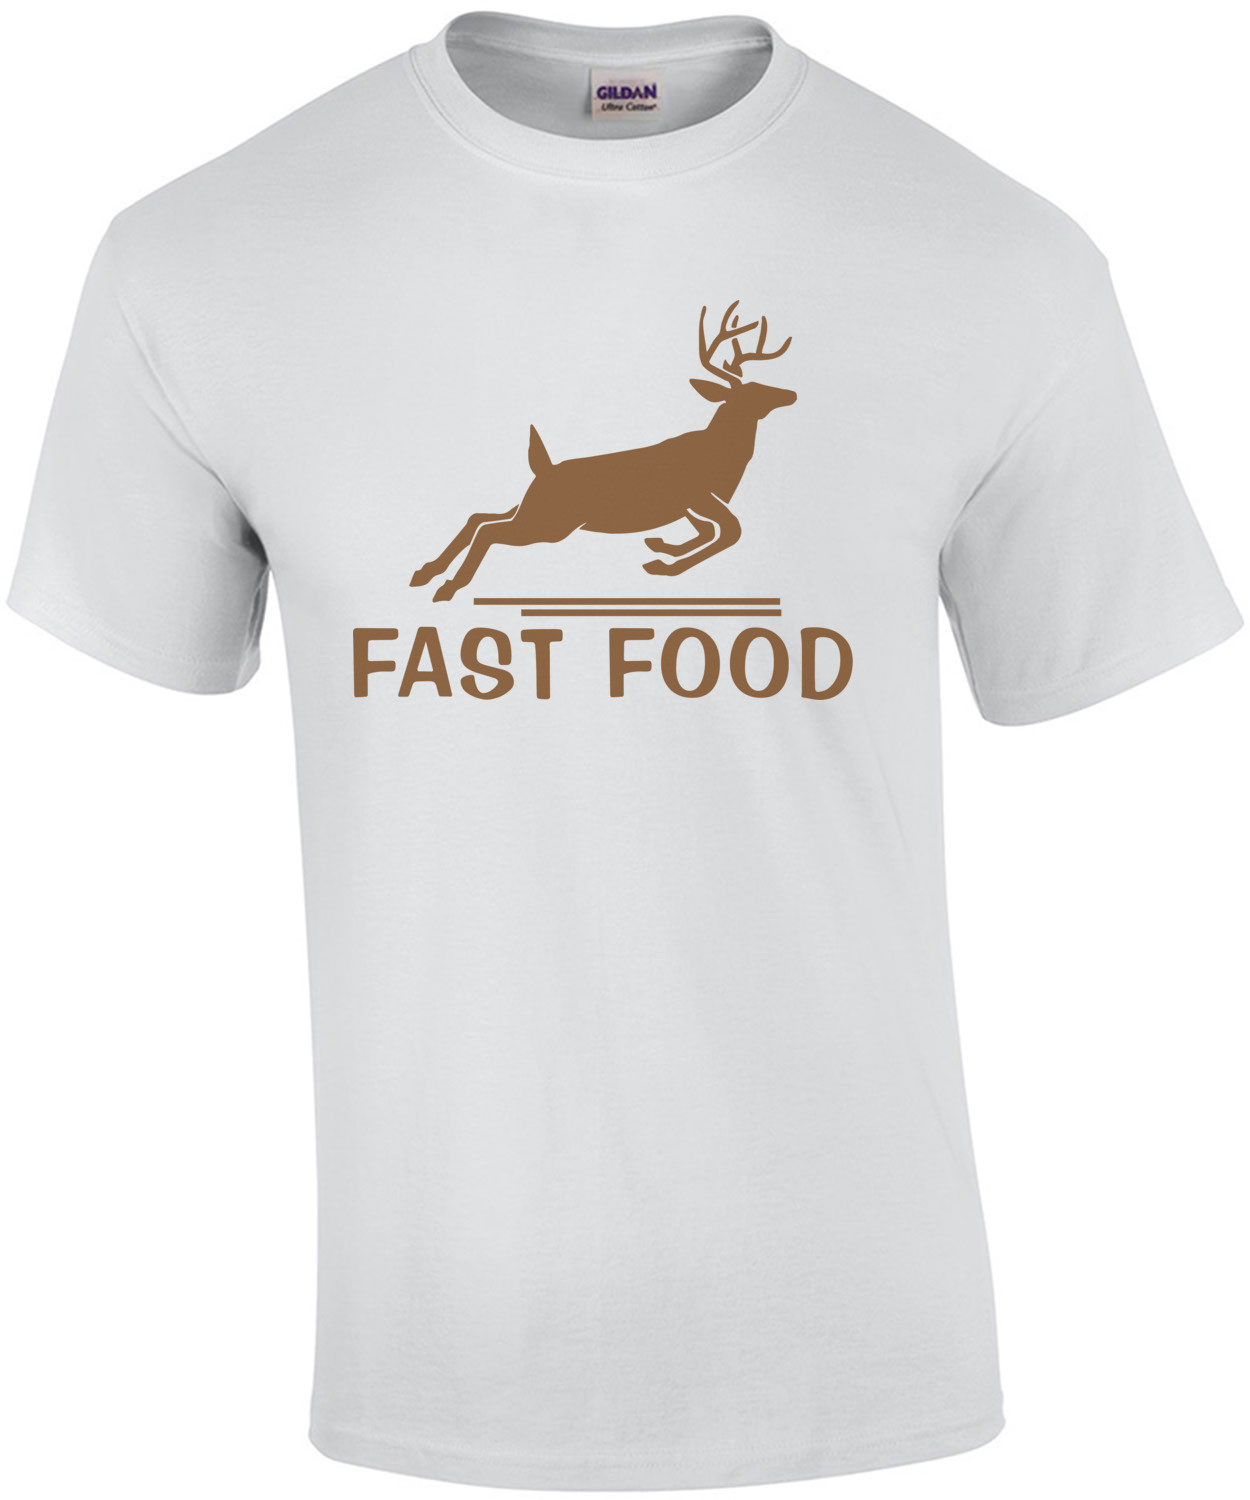 Fast Food - Funny Hunting